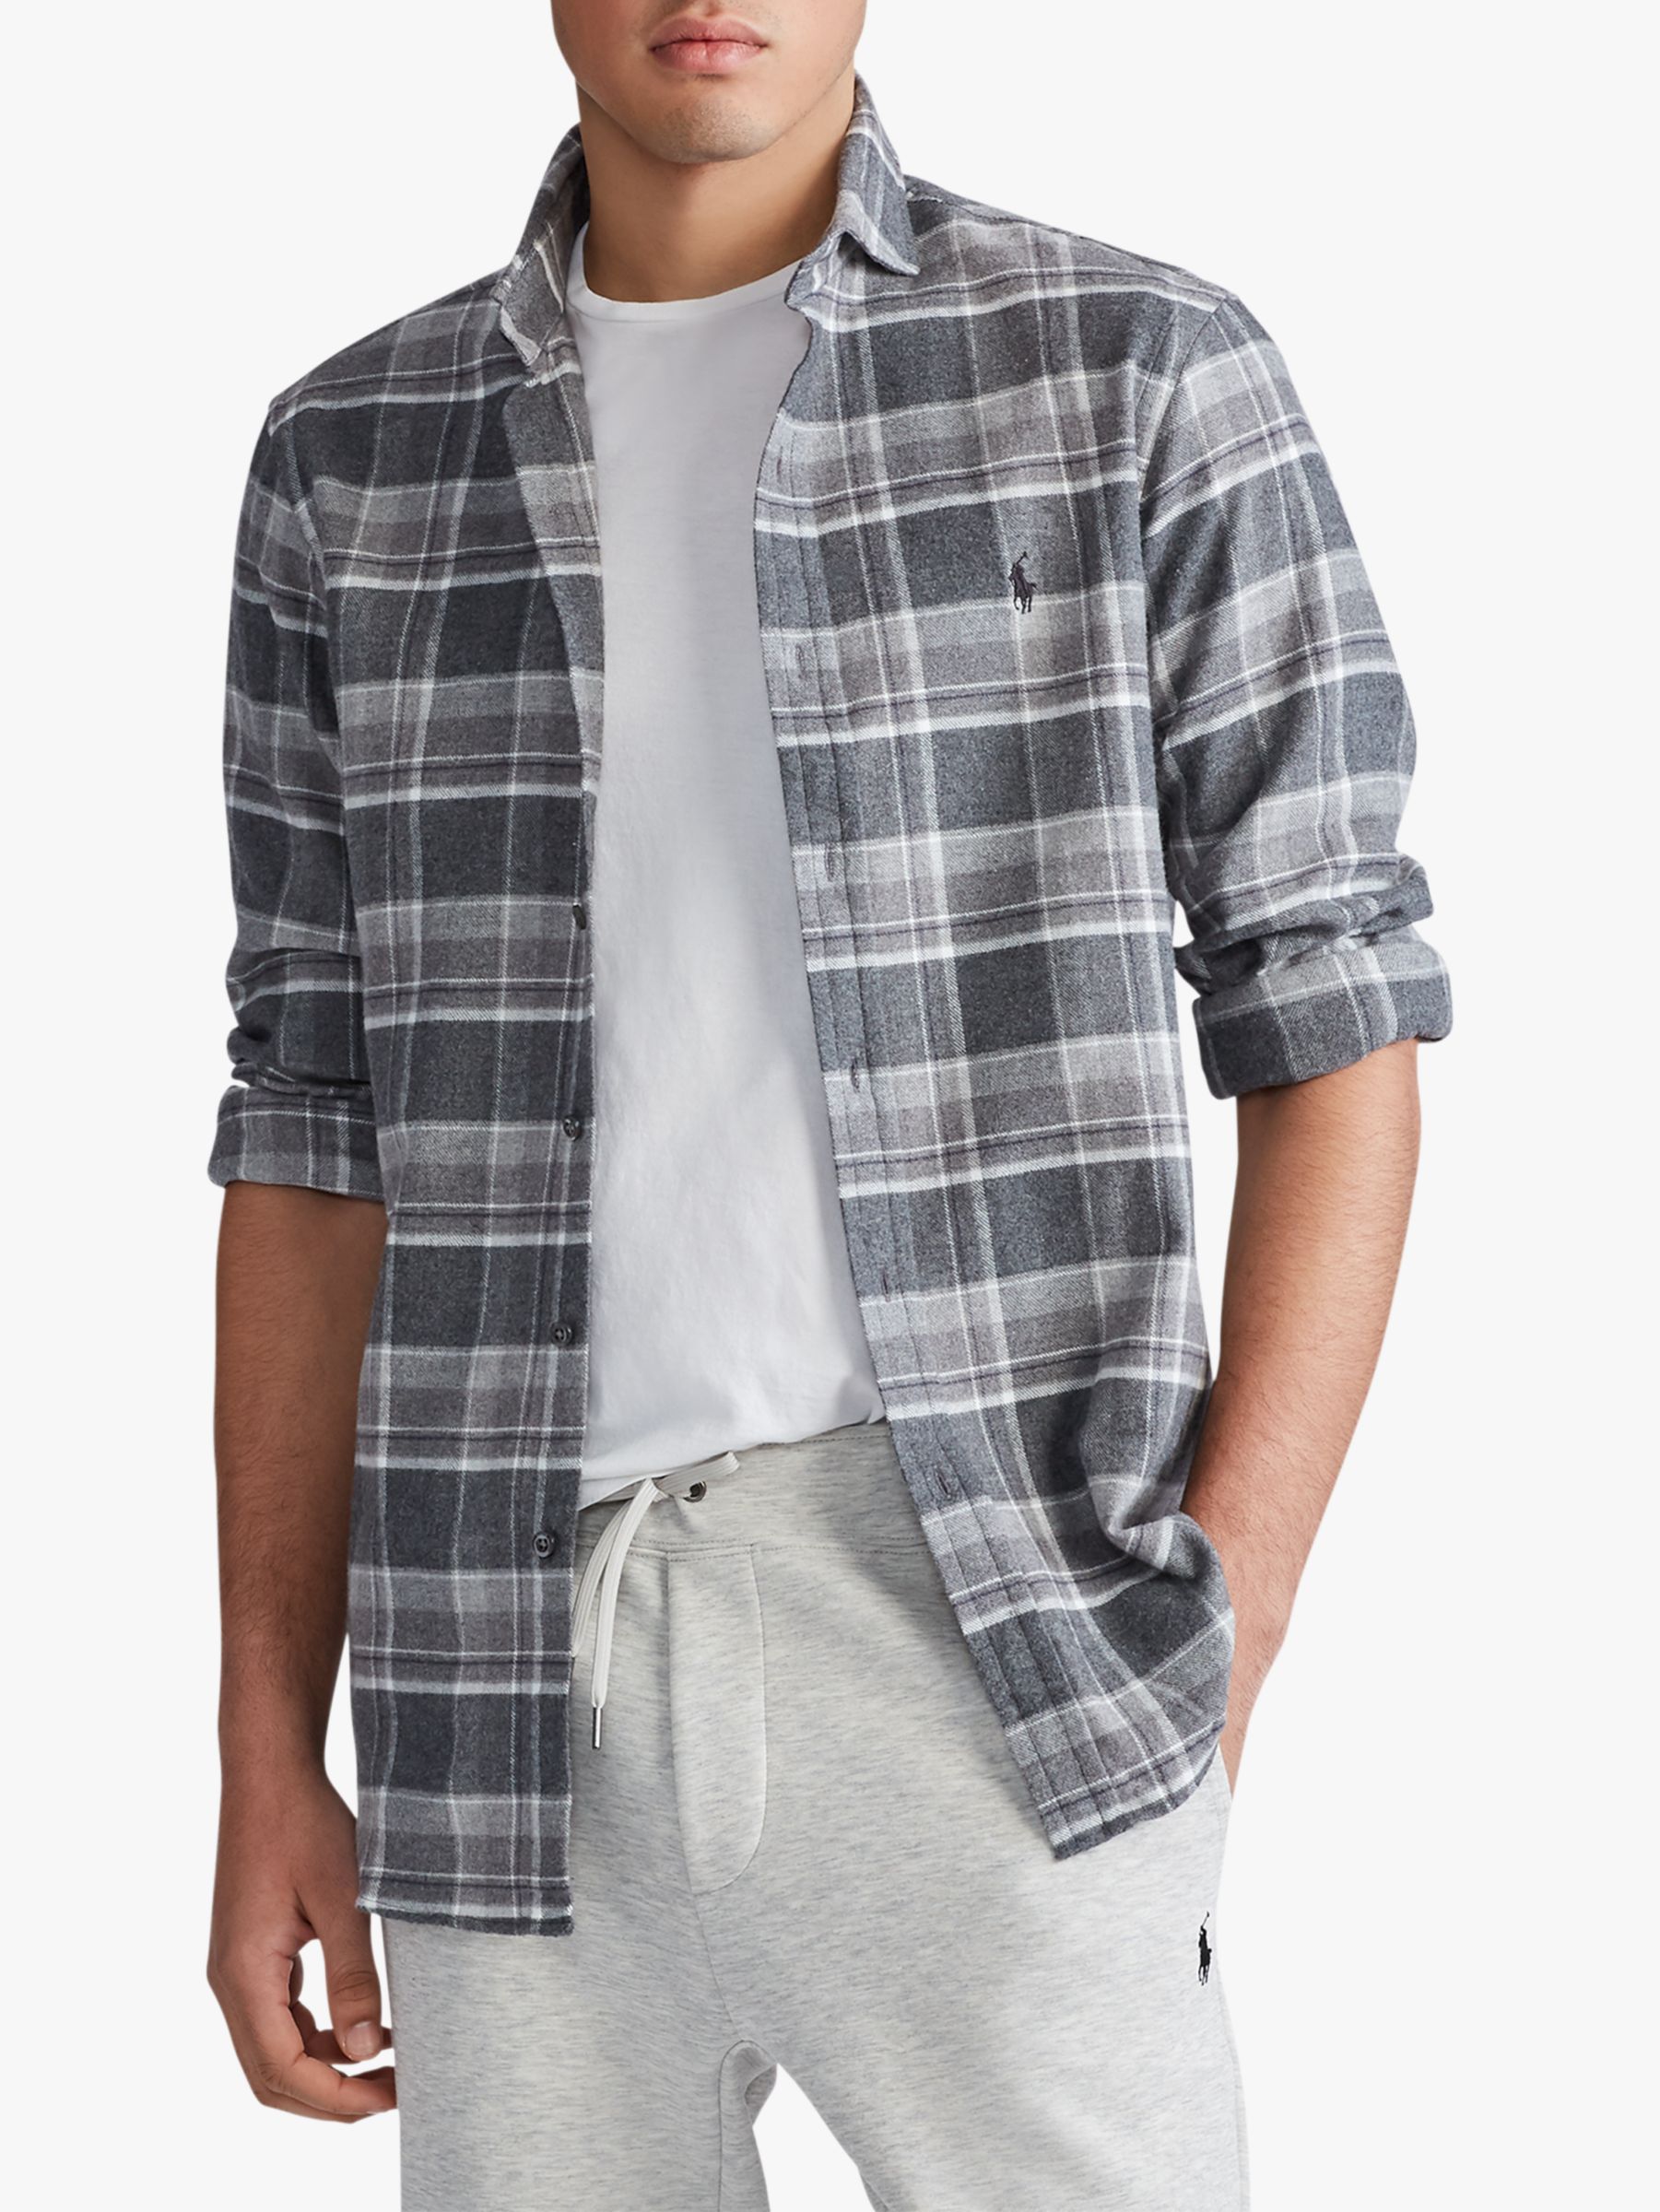 Polo Ralph Lauren Plaid Brushed Cotton Check Shirt, Pewter/Cream